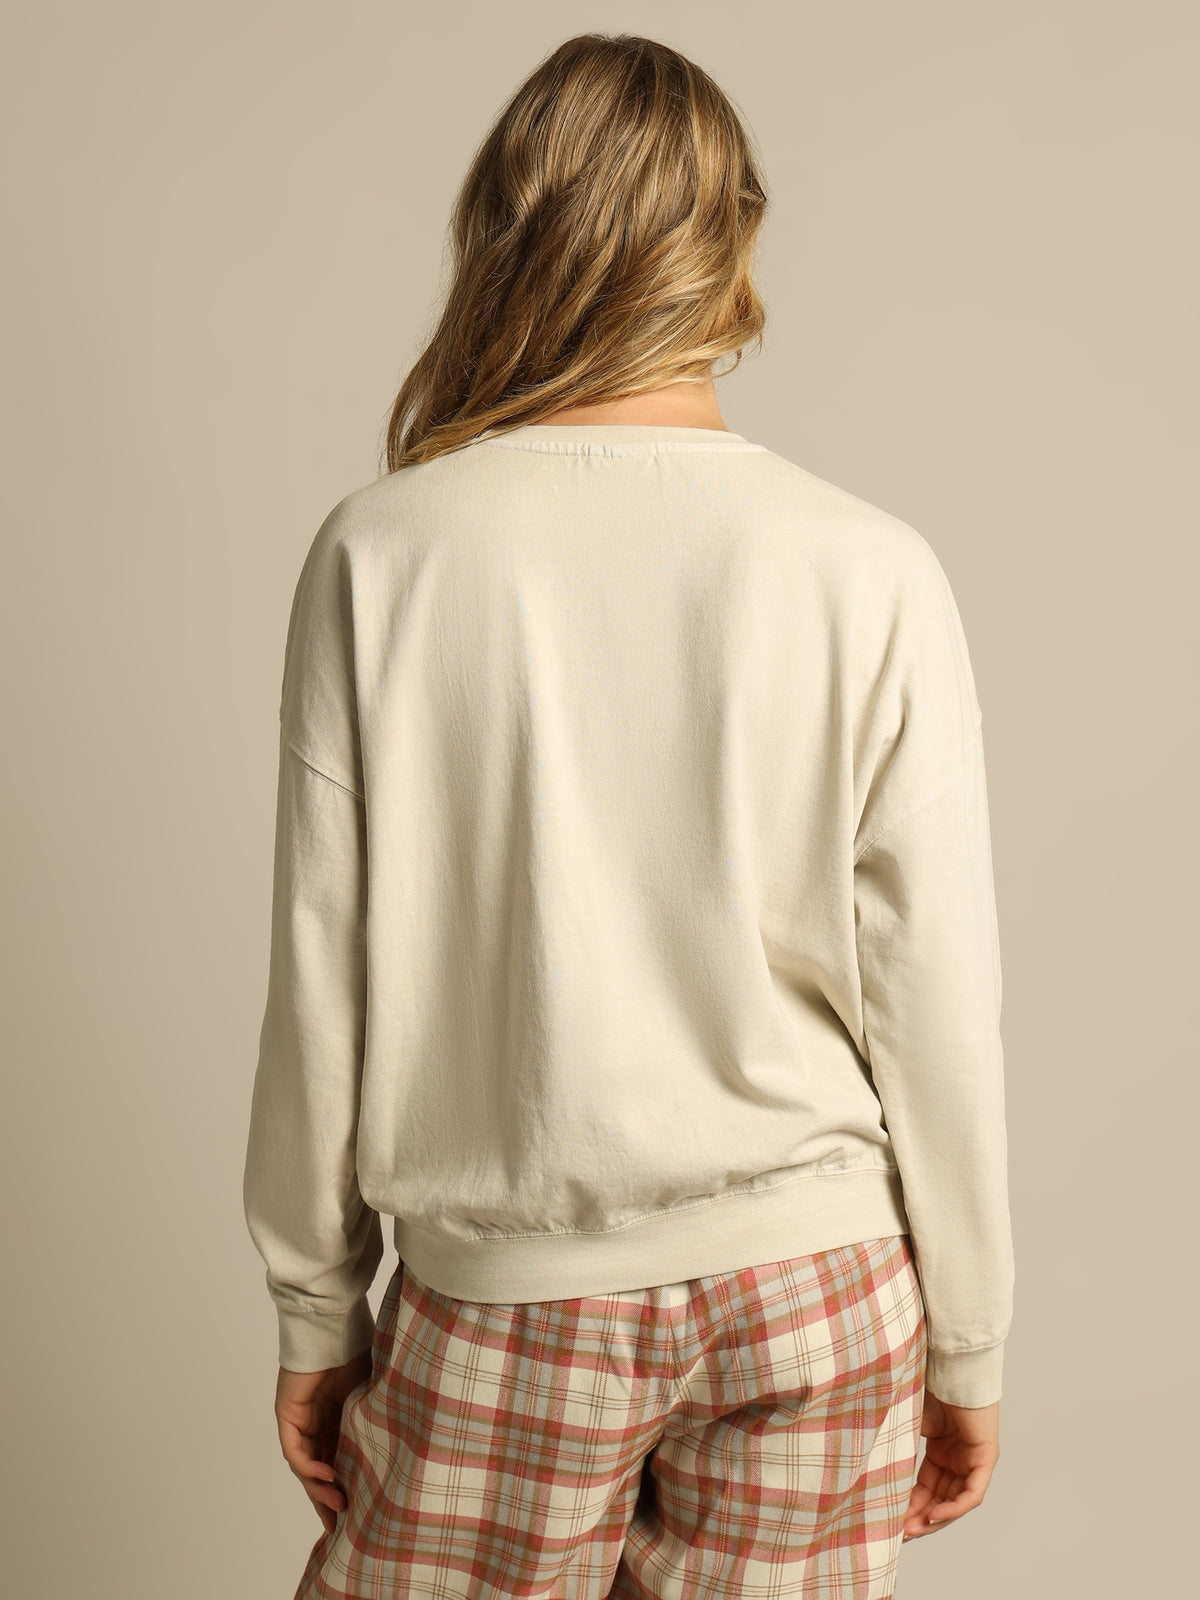 City Circle Sweater in White